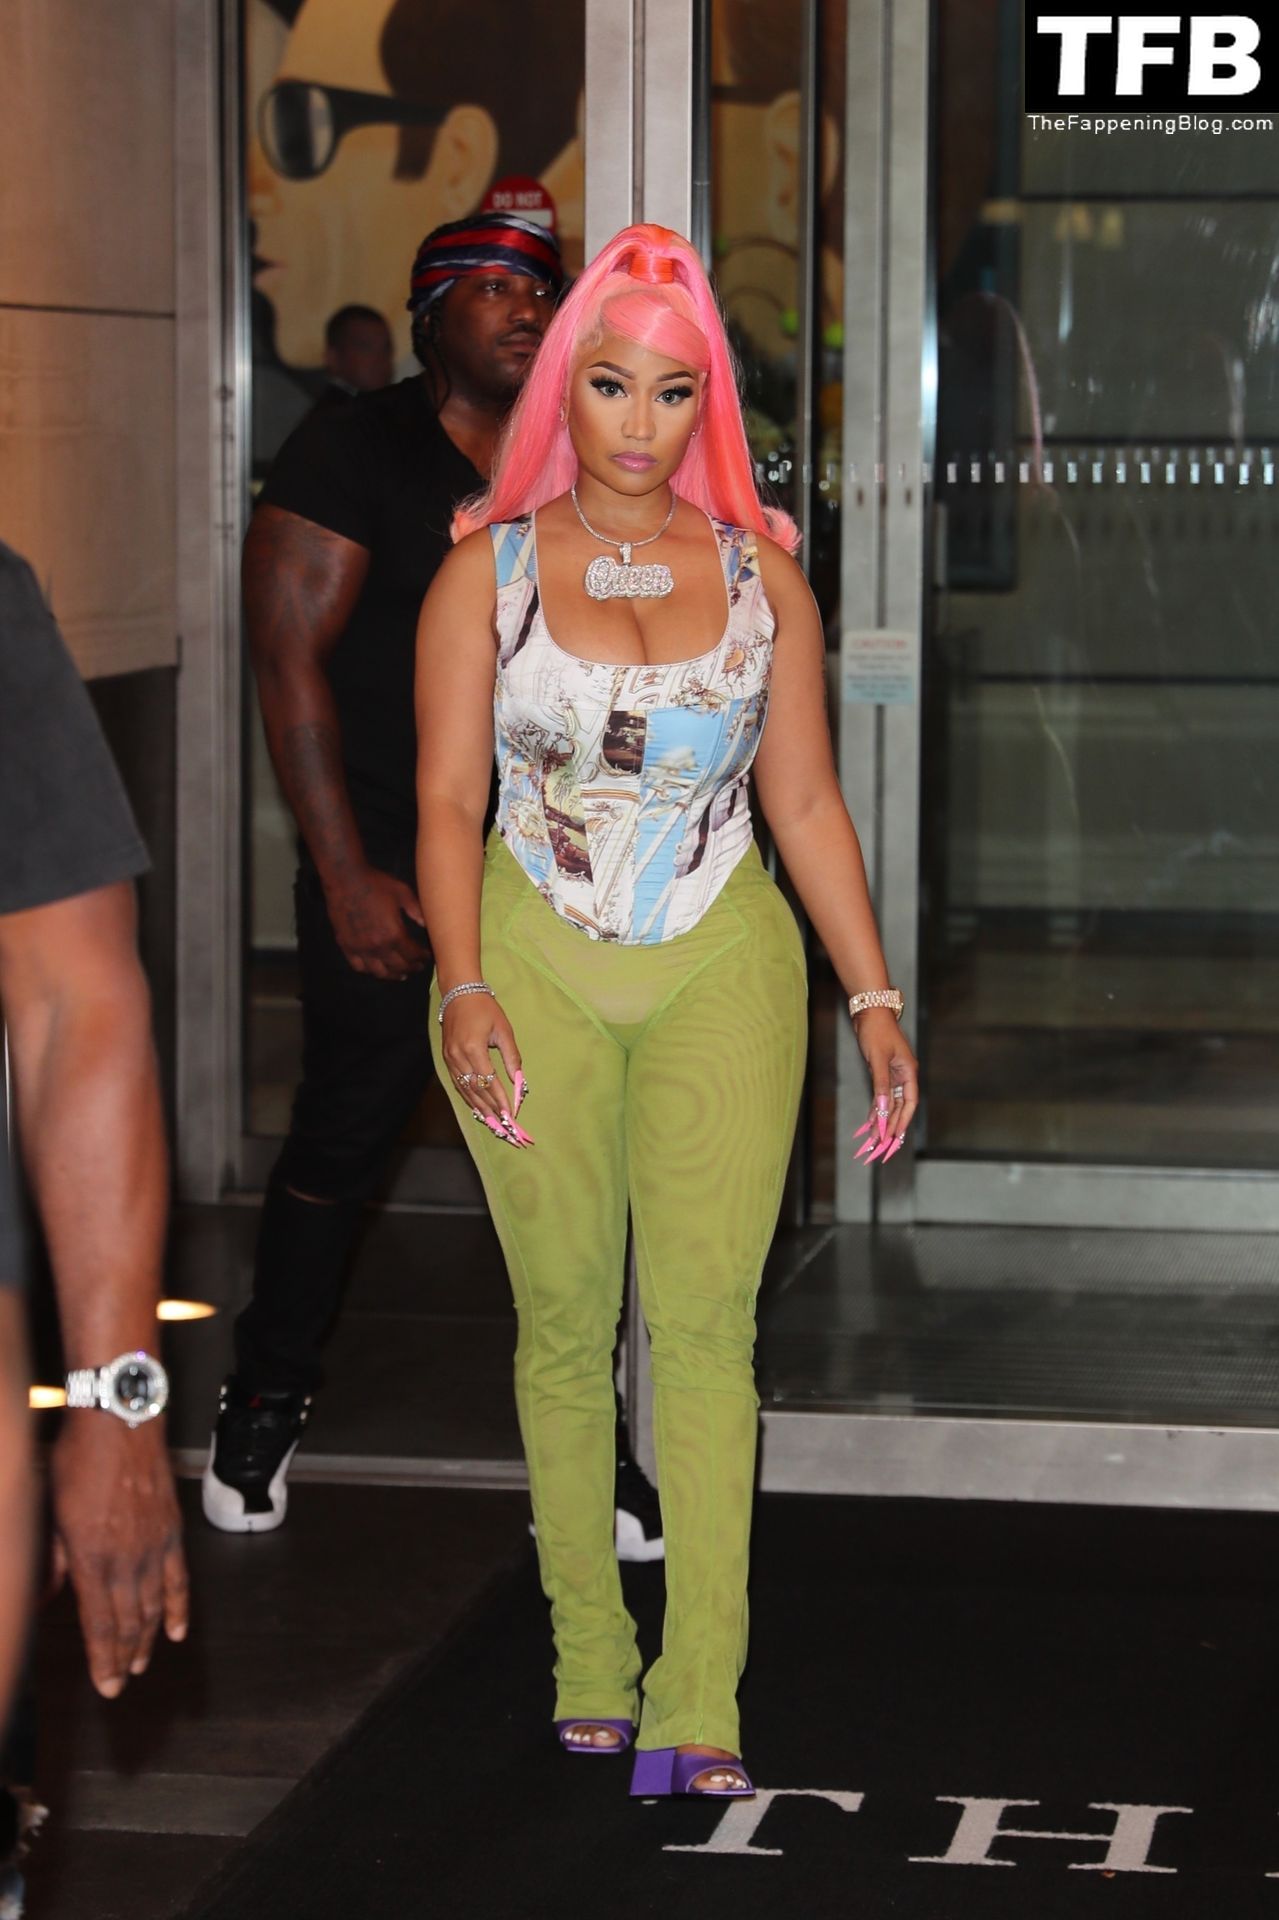 Nicki Minaj Sexy The Fappening Blog 32 - Nicki Minaj Checks Out of Her Hotel After Her Epic Night at the MTV VMA’s in NYC (38 Photos)